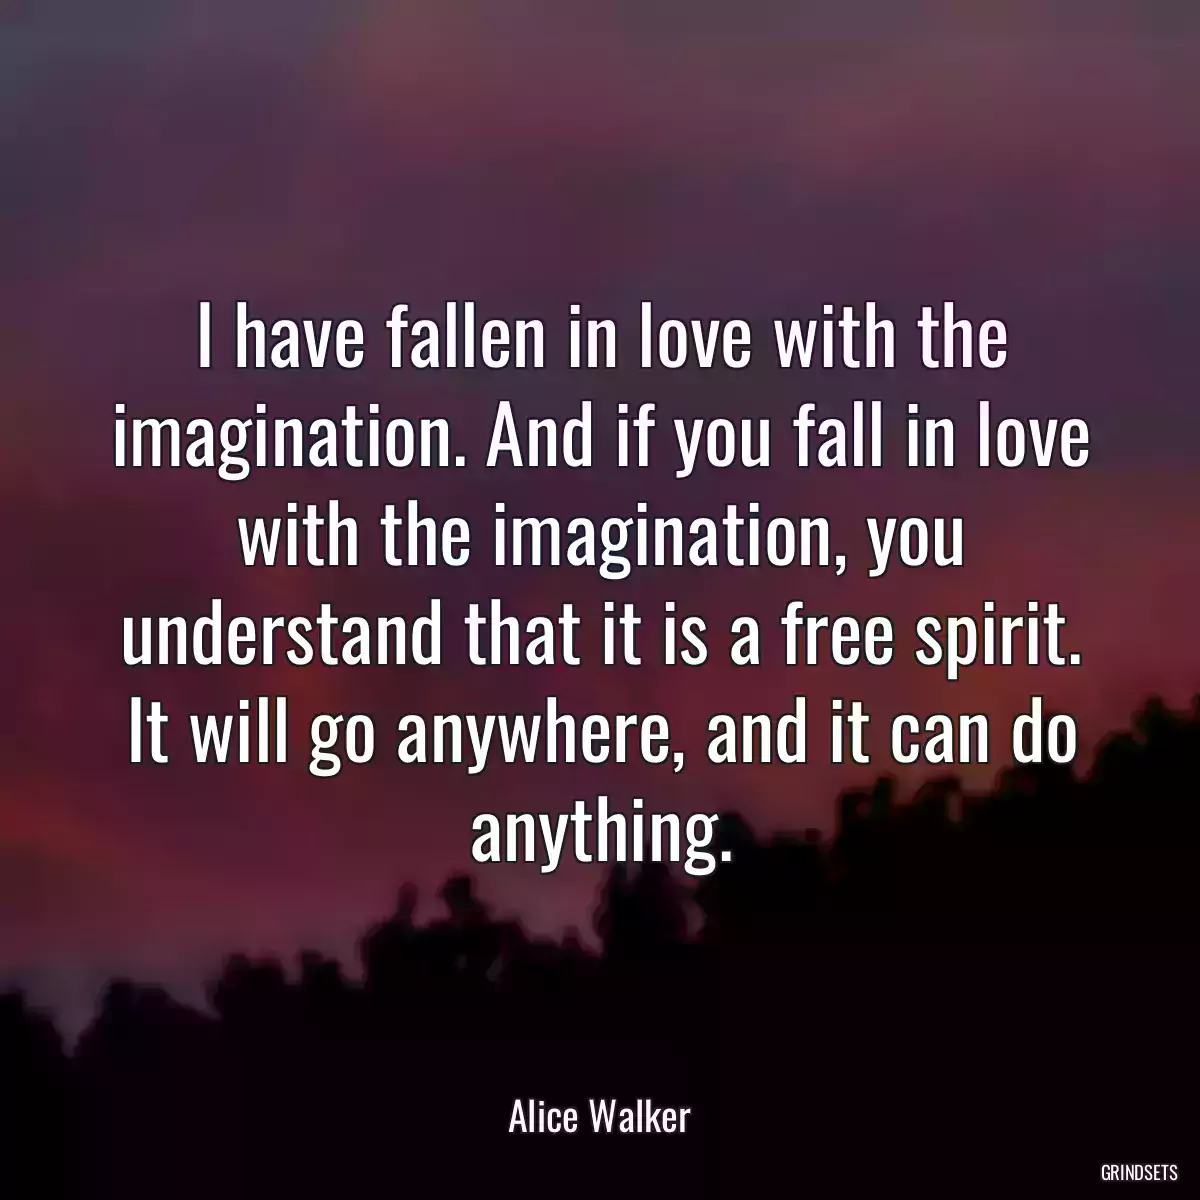 I have fallen in love with the imagination. And if you fall in love with the imagination, you understand that it is a free spirit. It will go anywhere, and it can do anything.